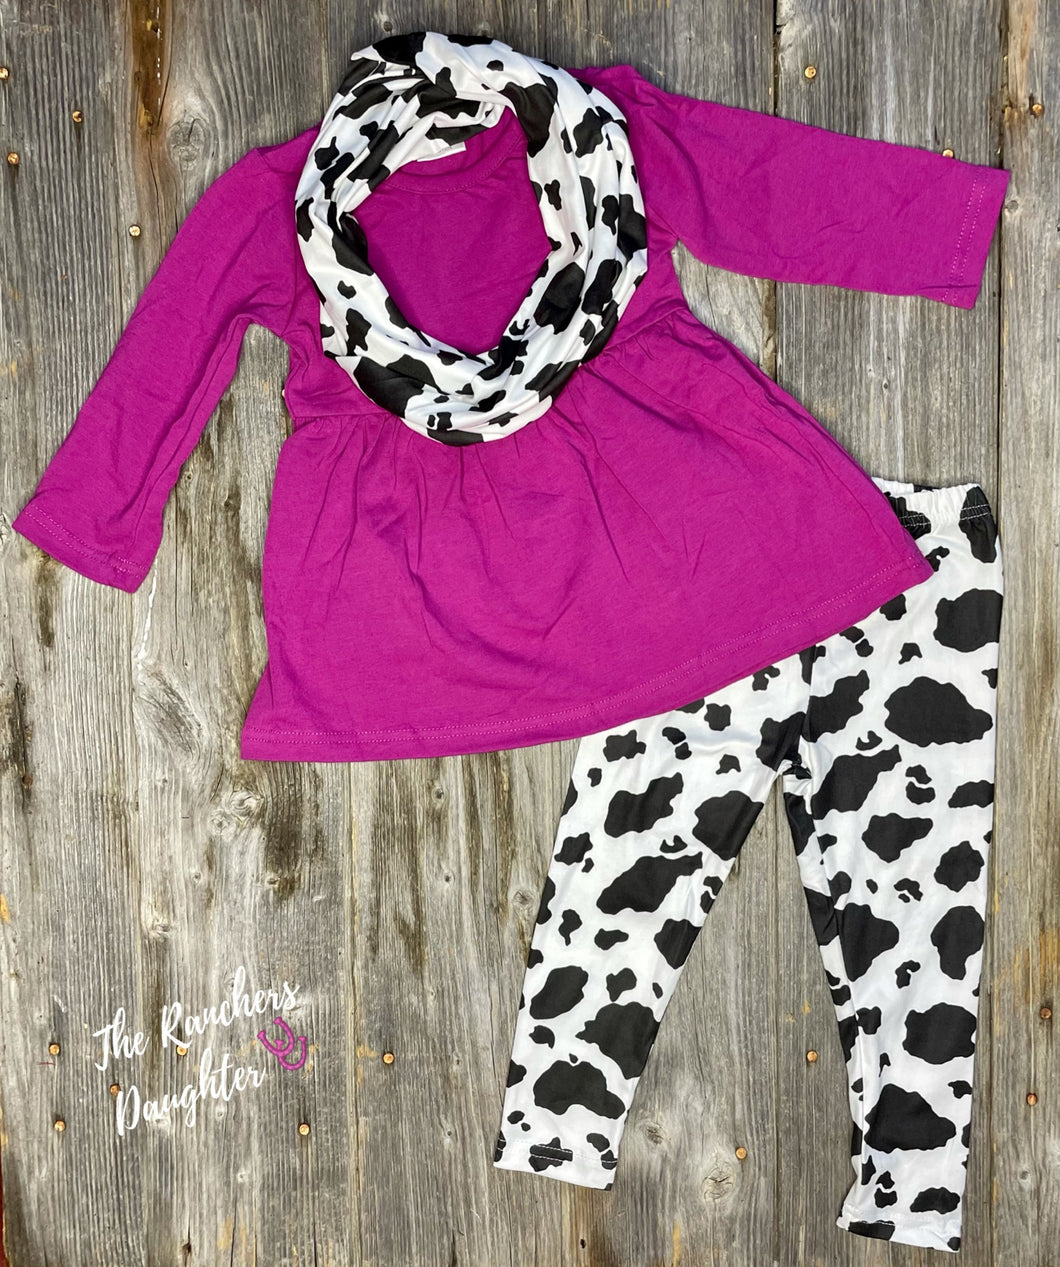 Magenta Cowprint Outfit